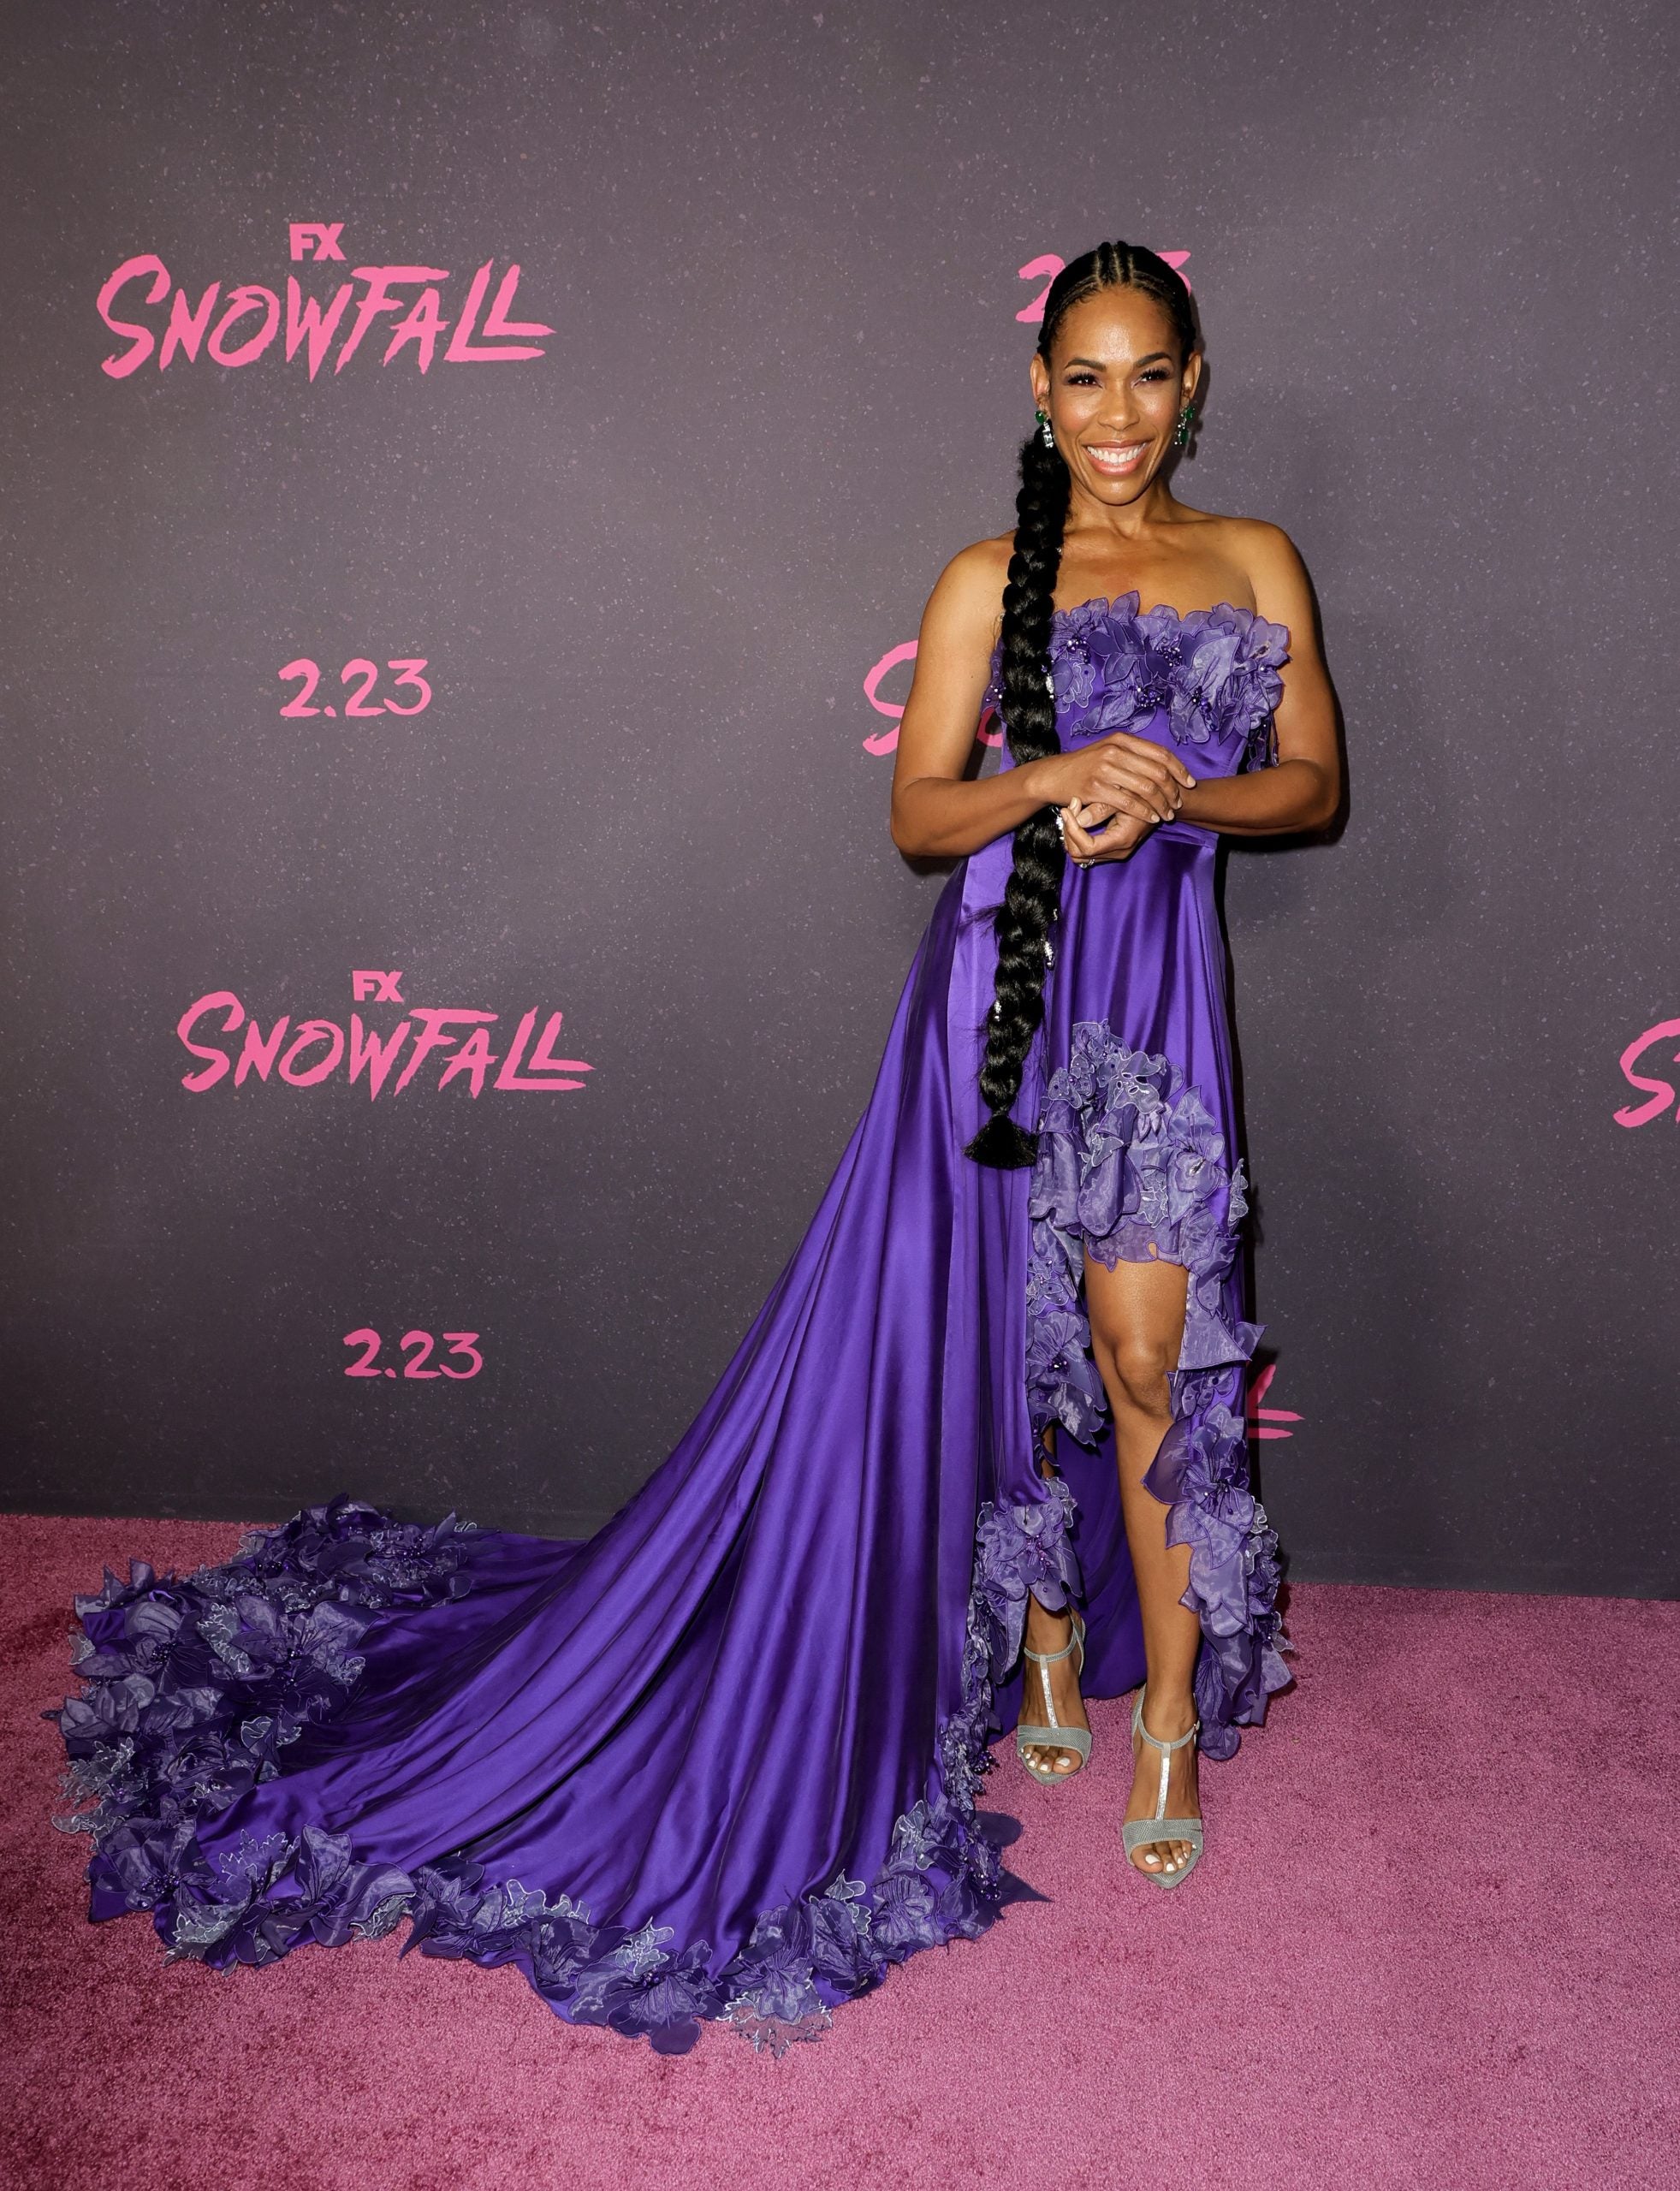 Star Gazing: The James & Curry Families Light Up All-Star Weekend, The Cast Of ‘Snowfall’ Shines On The Red Carpet & More